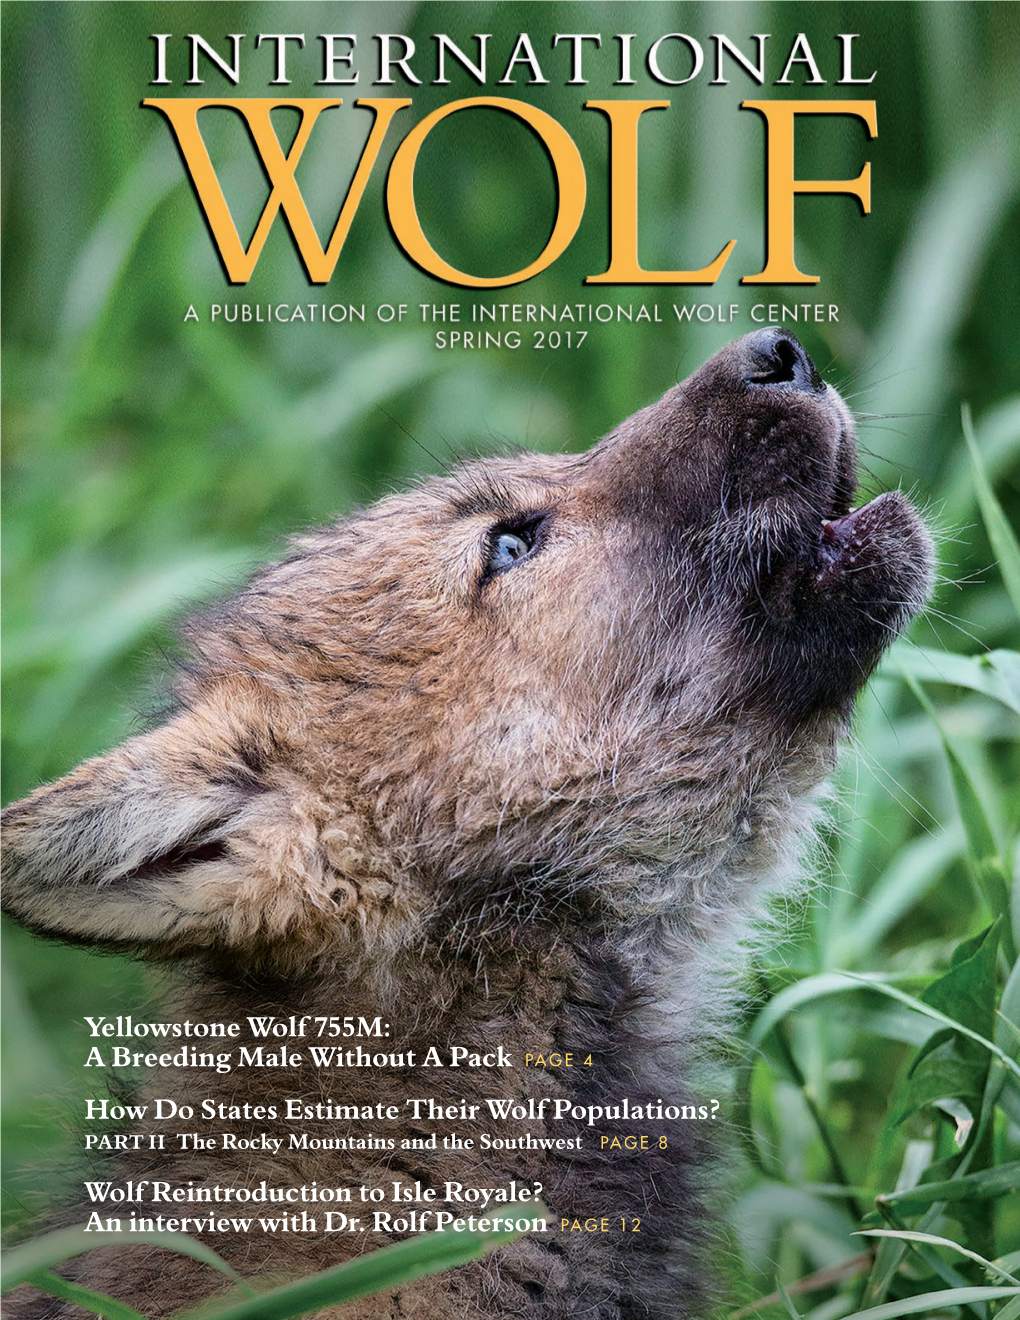 Yellowstone Wolf 755M: a Breeding Male Without a Pack PAGE 4 How